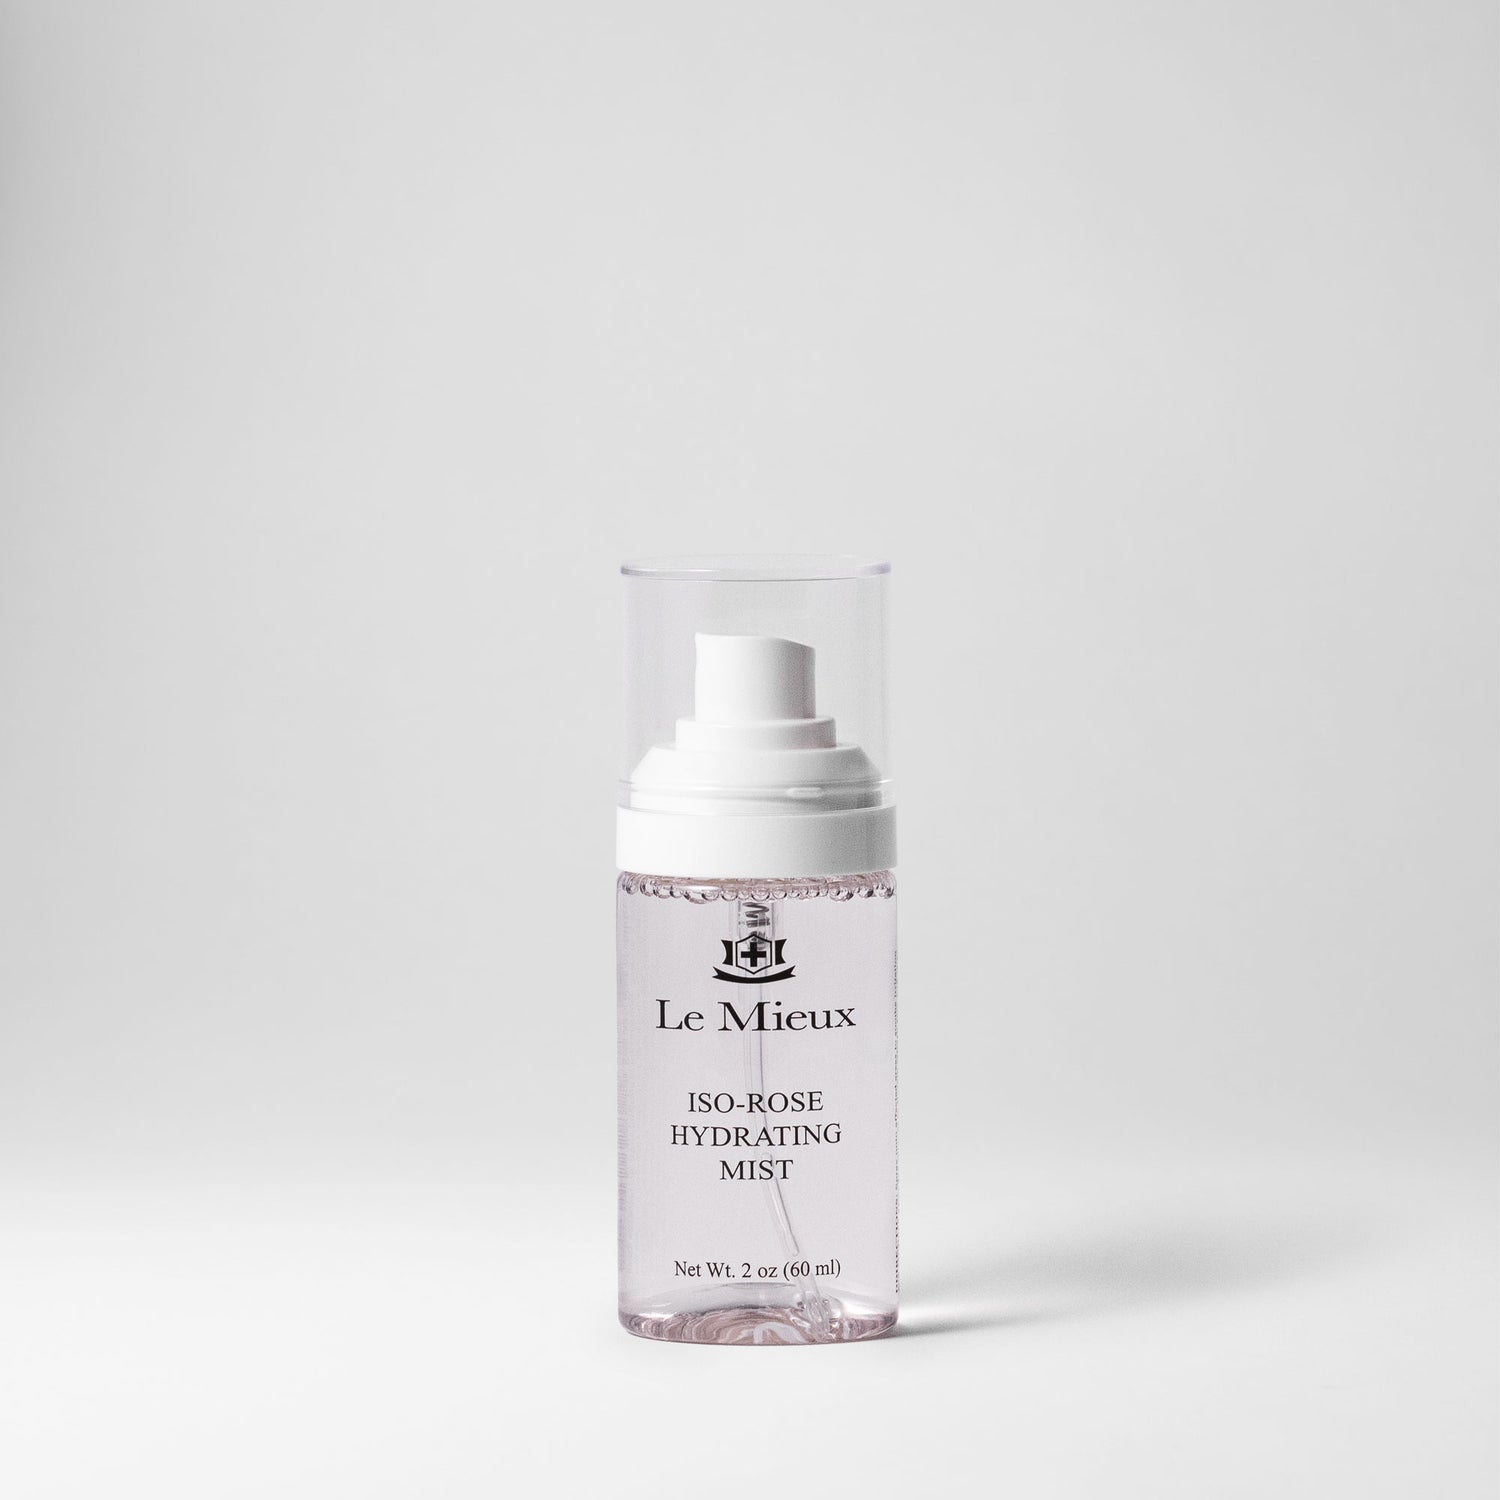  ISO-ROSE HYDRATING MIST from Le Mieux Skincare - 3